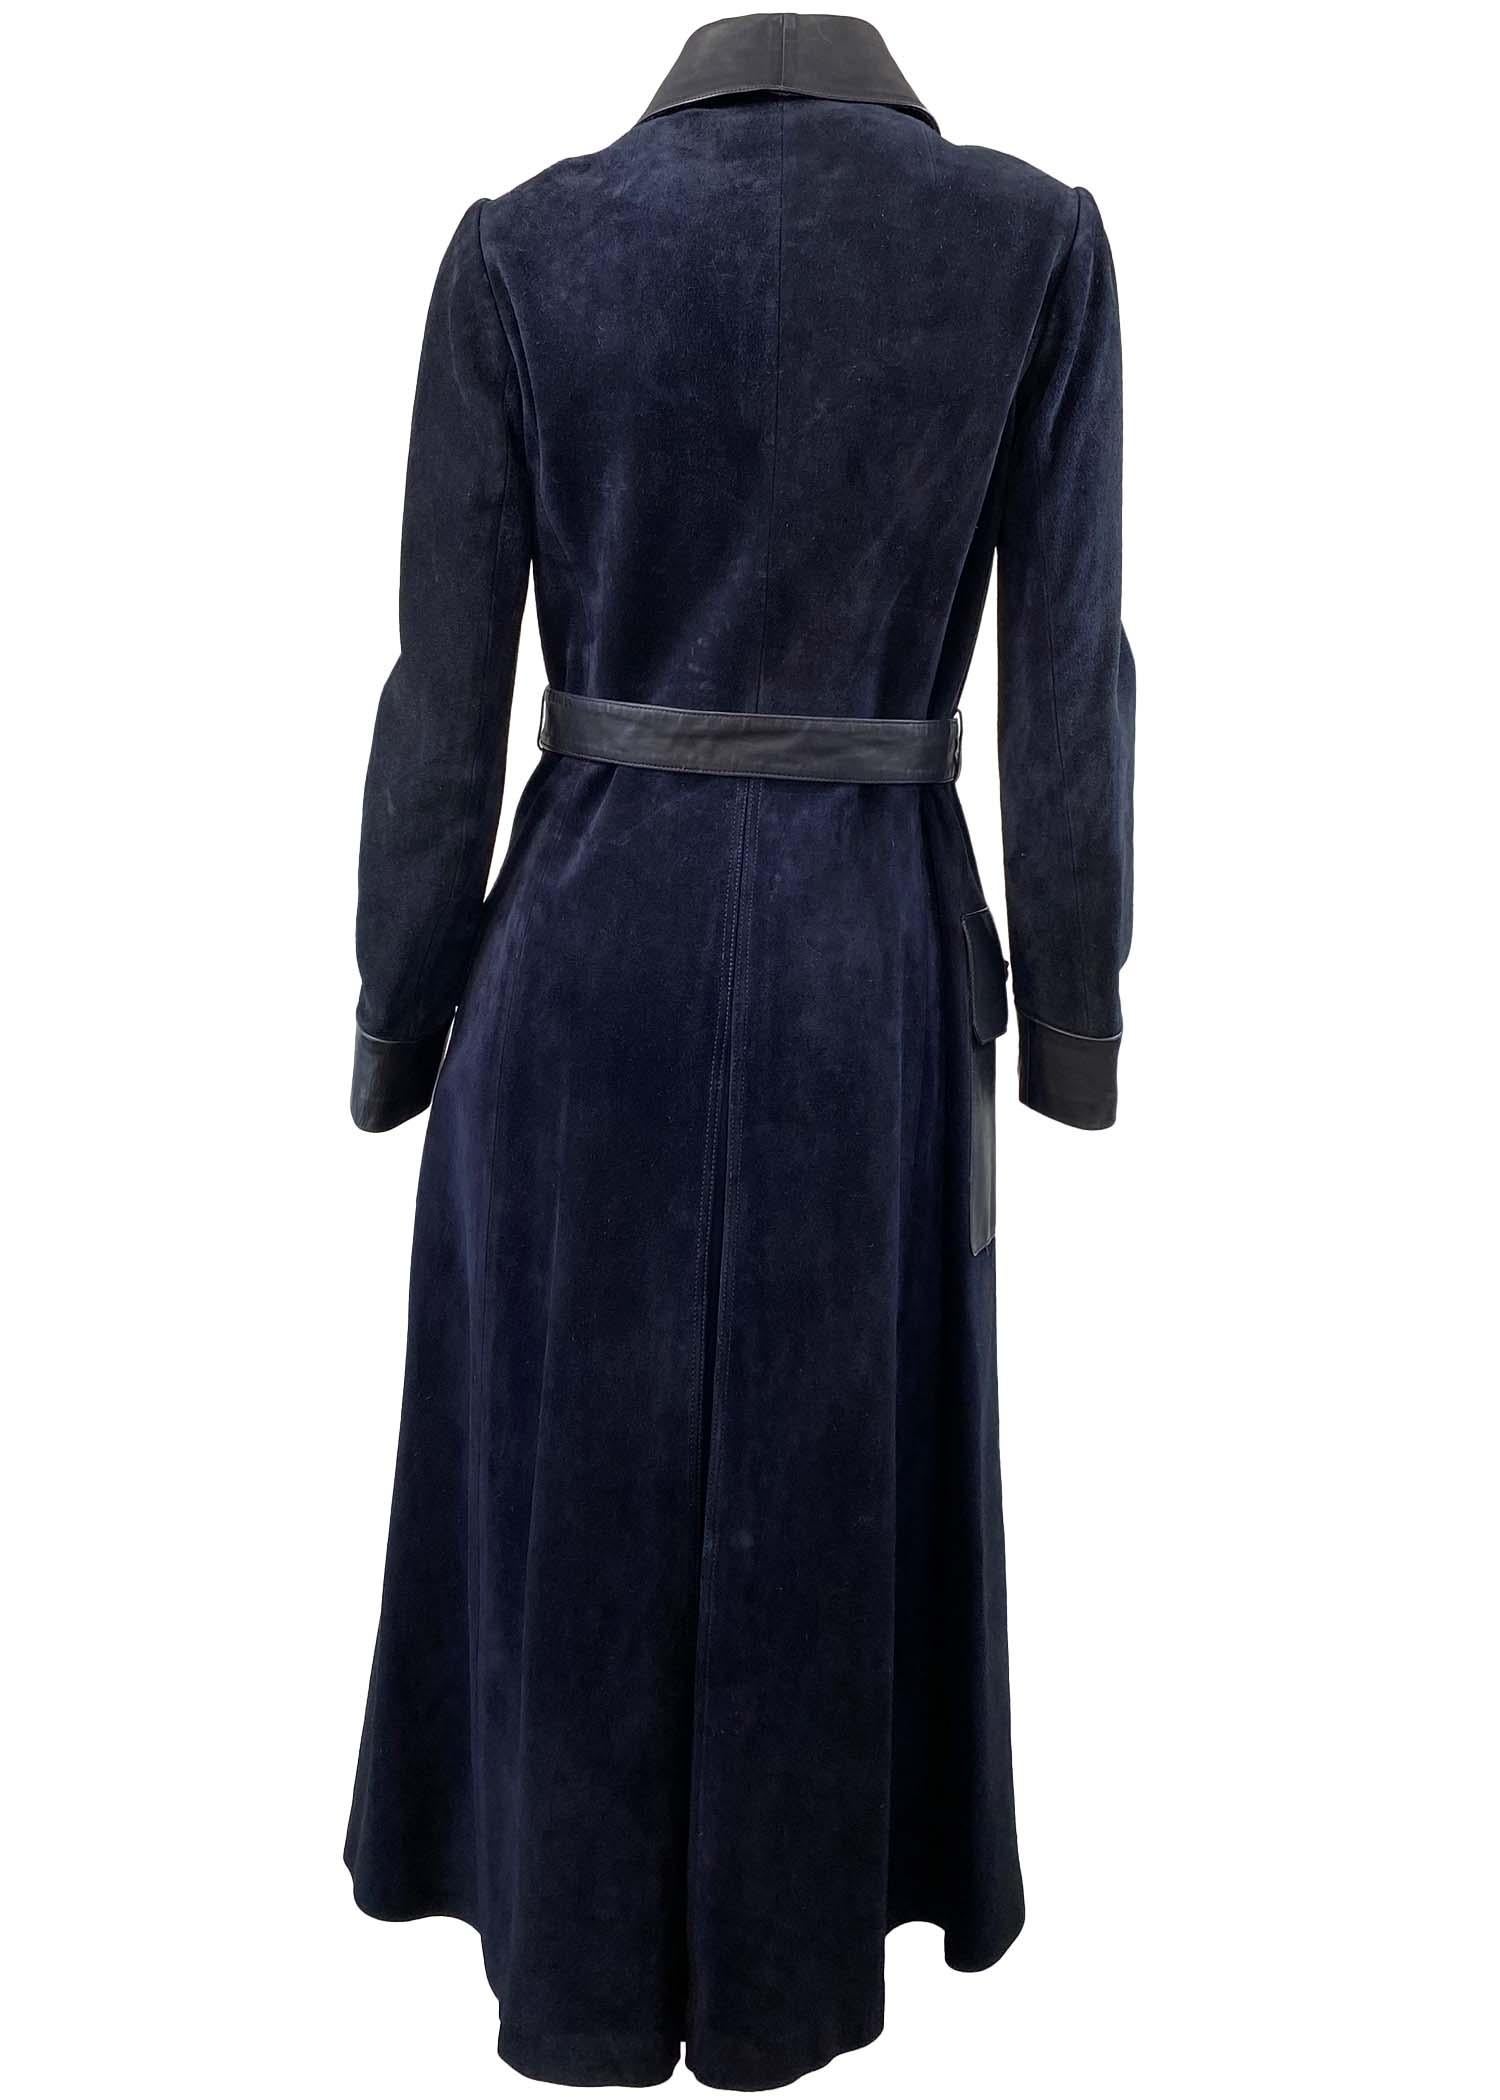 Women's 1972 Gucci Runway Dionysus Tiger Head Navy Suede Leather Full-Length Trench Coat